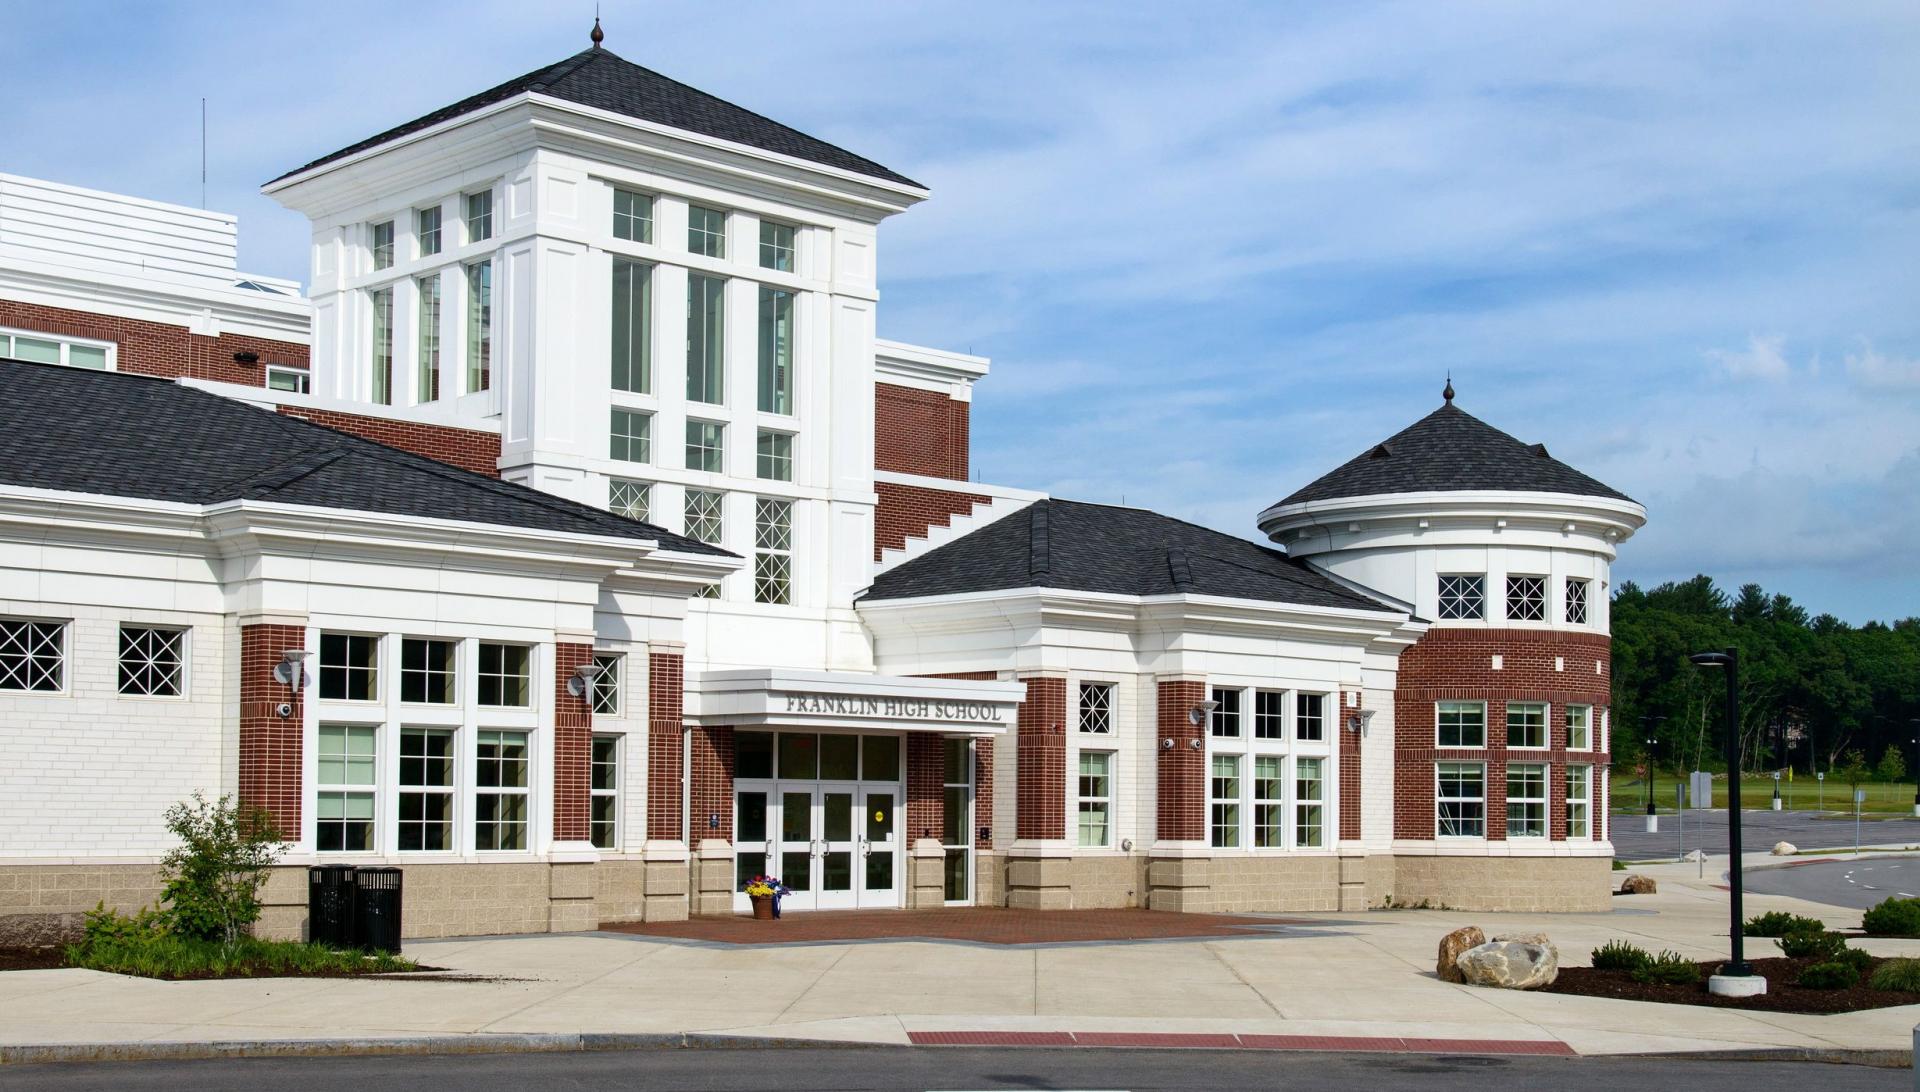 photo of the front of the highschool